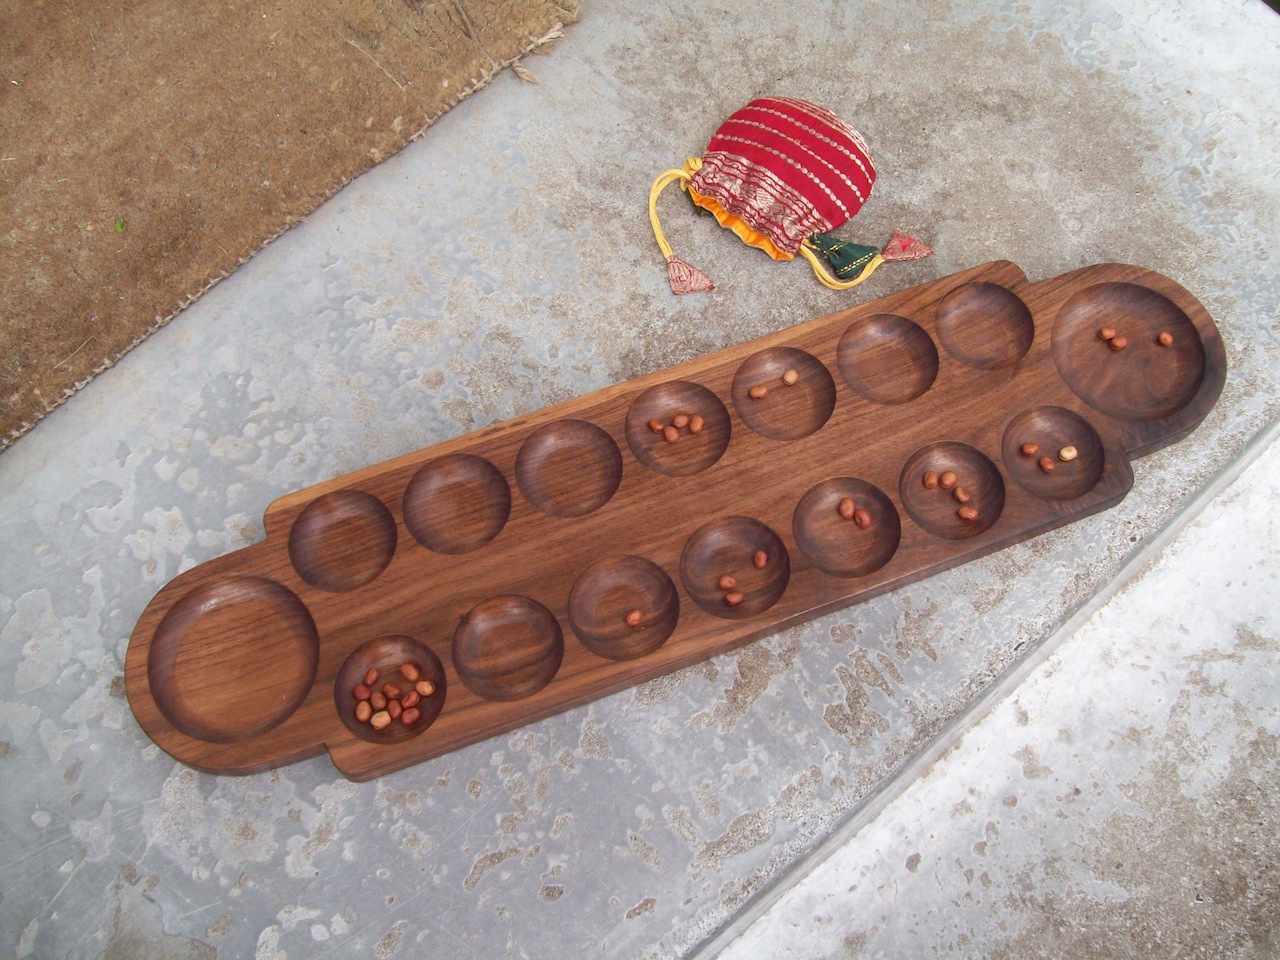 Brian S Mancala Board The Wood Whisperer,Red Eared Turtle Food